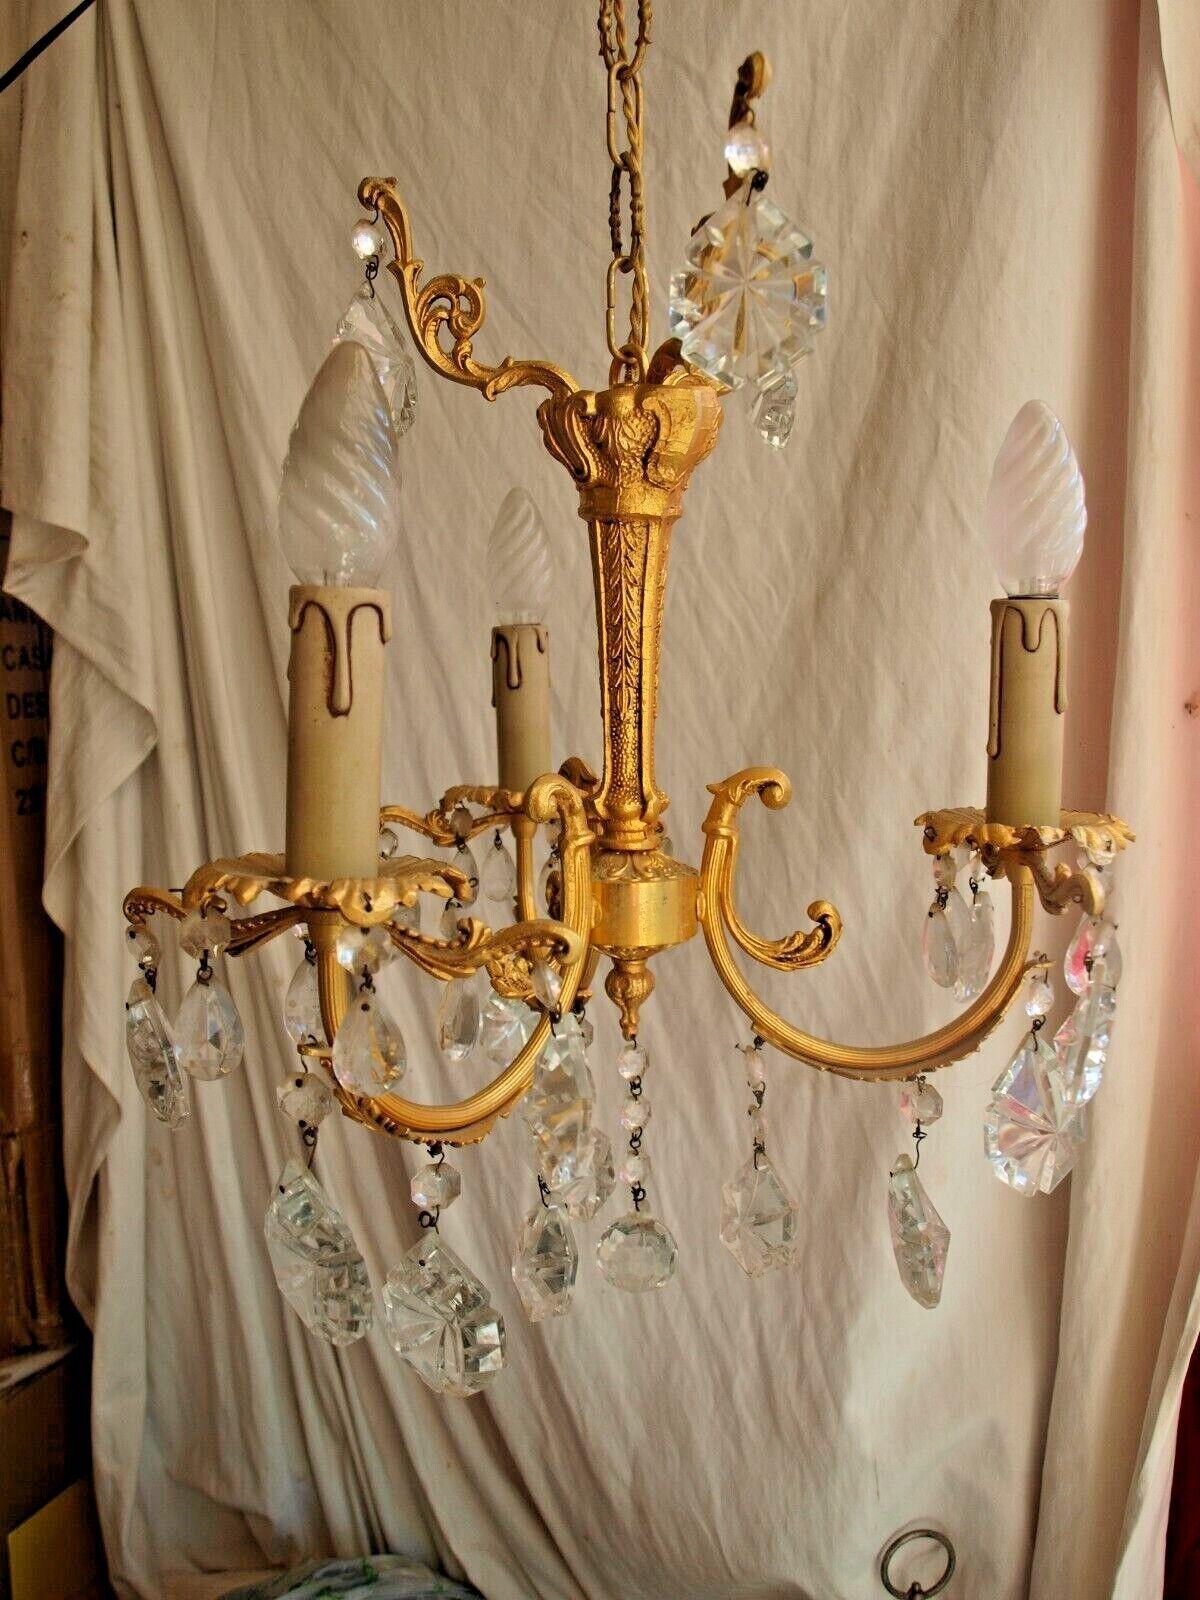 c1900 French Louis XIV Gilt Bronze with Large Cut Crystal Adornment. Beautiful chandelier for when a smaller size chandelier is desired.